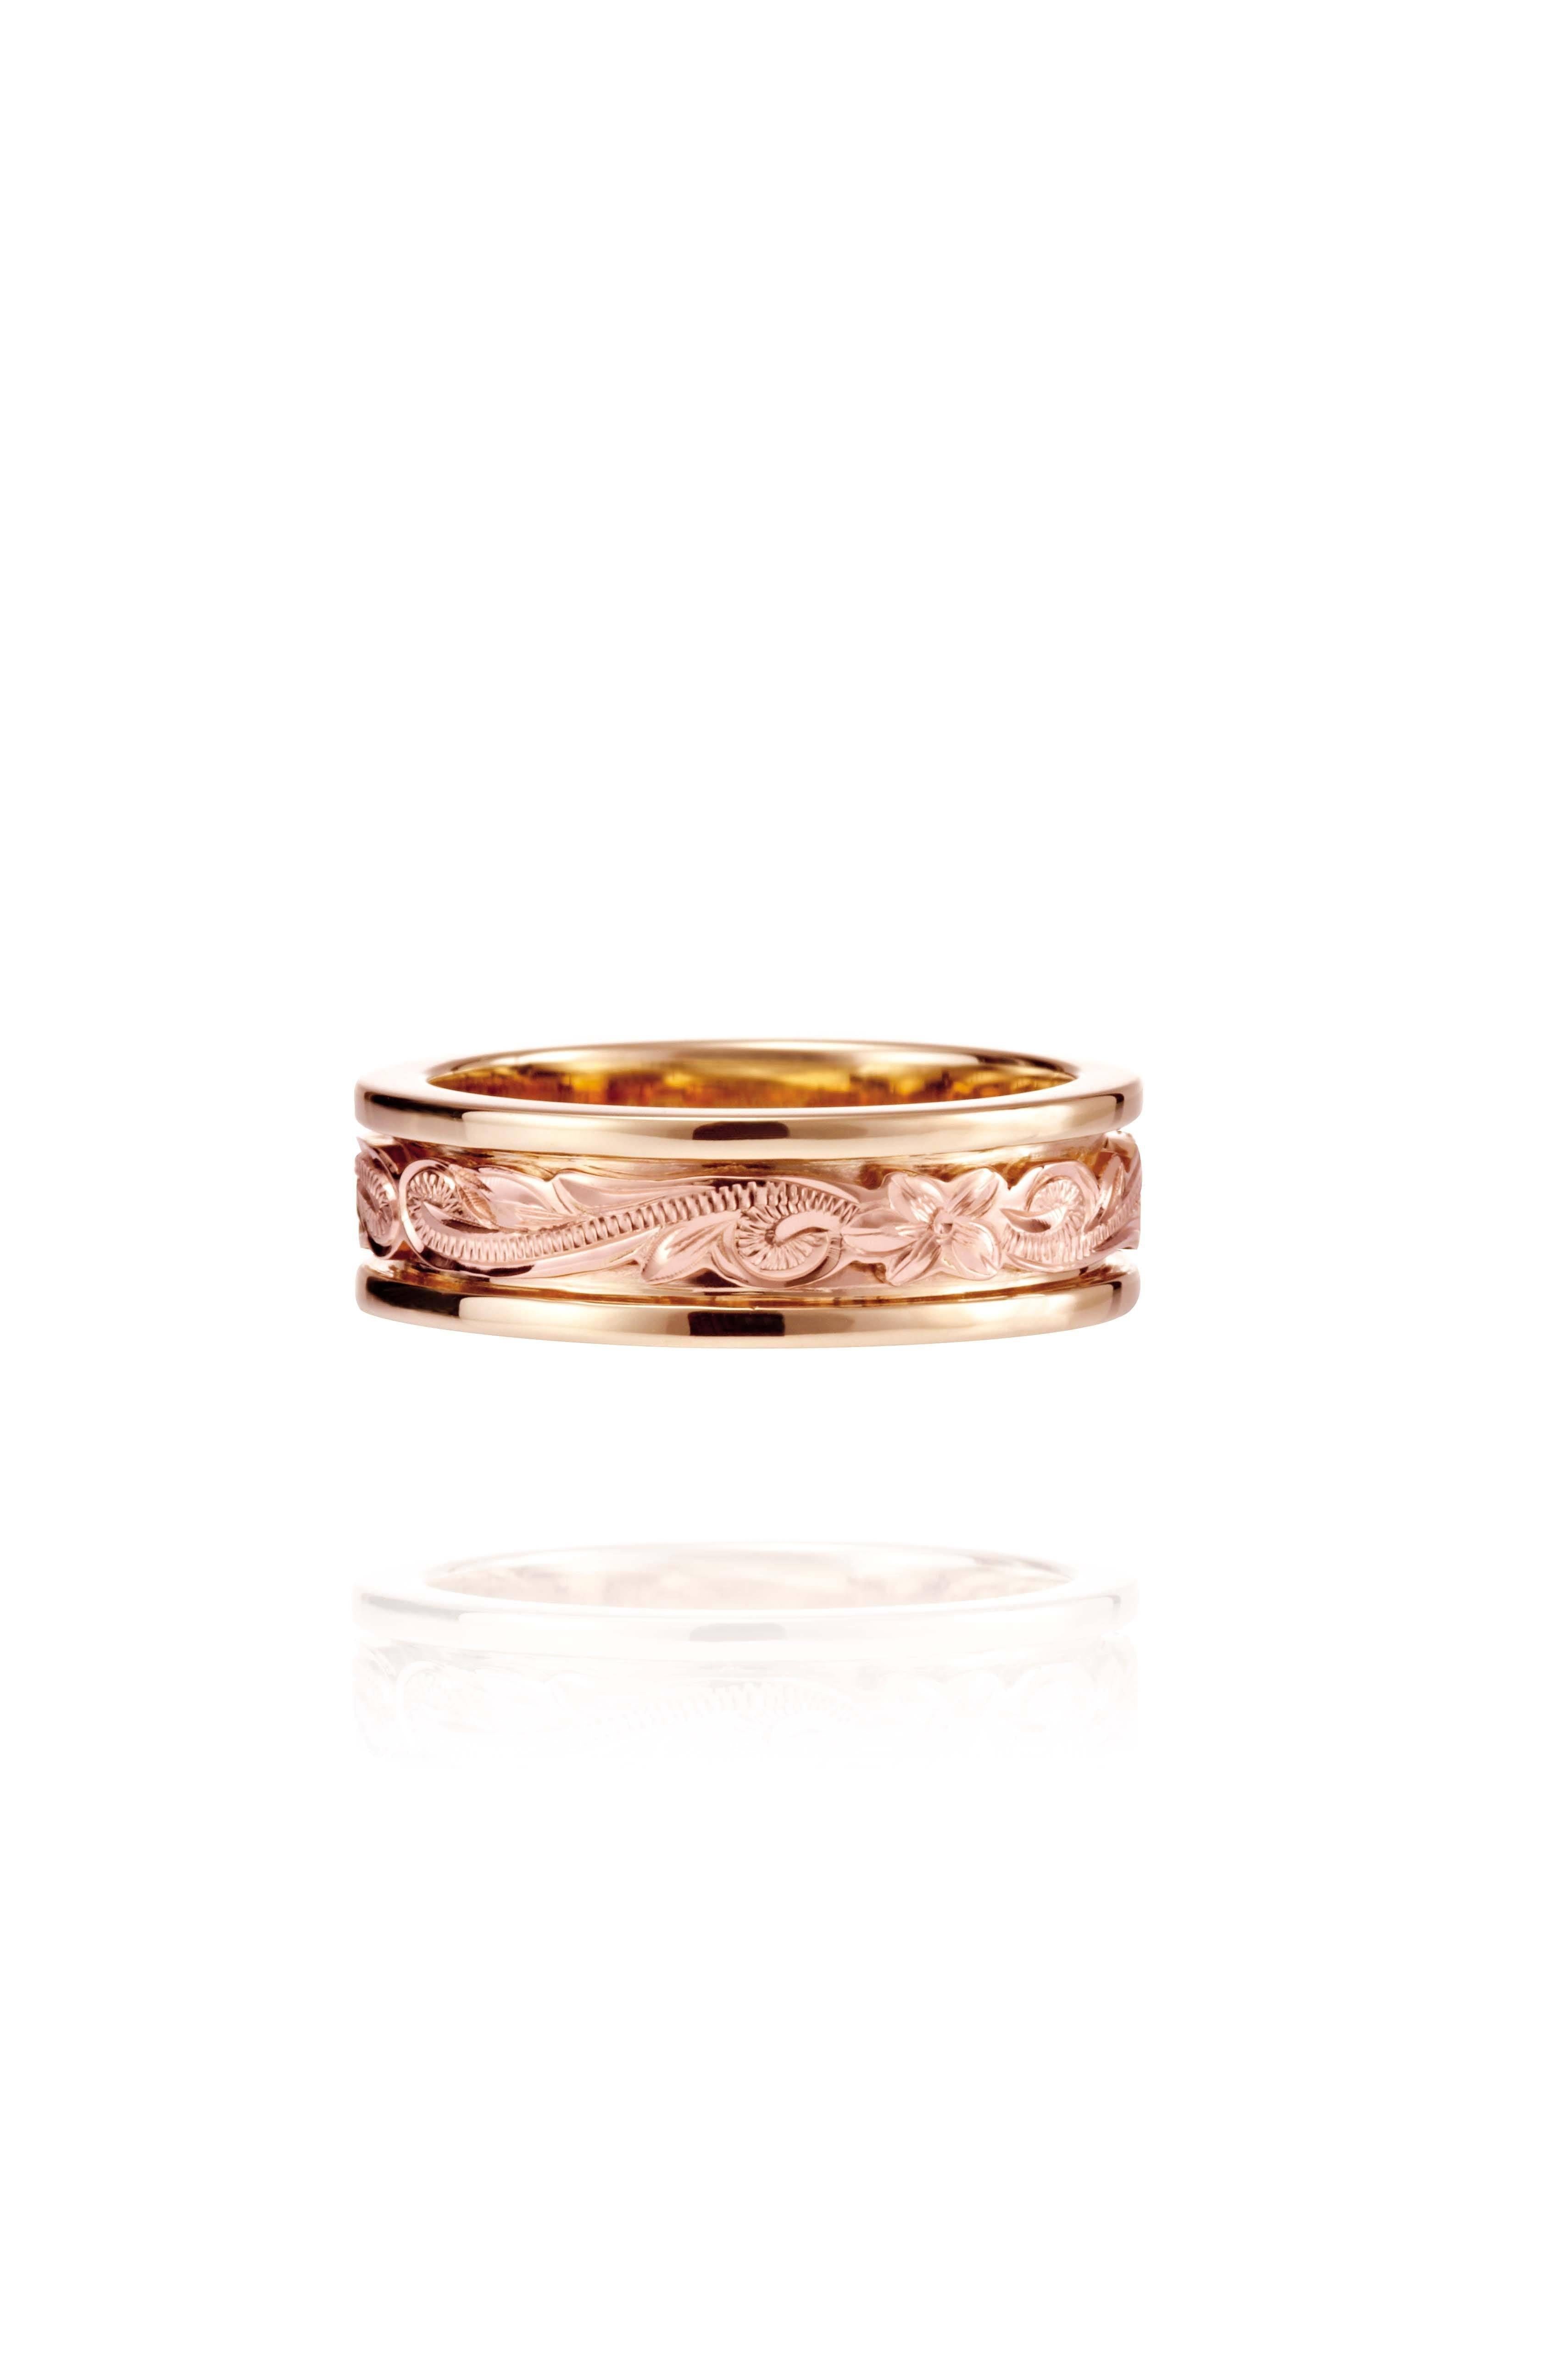 In this photo there is a yellow and rose gold two-tone ring with flower and scroll hand-engravings.